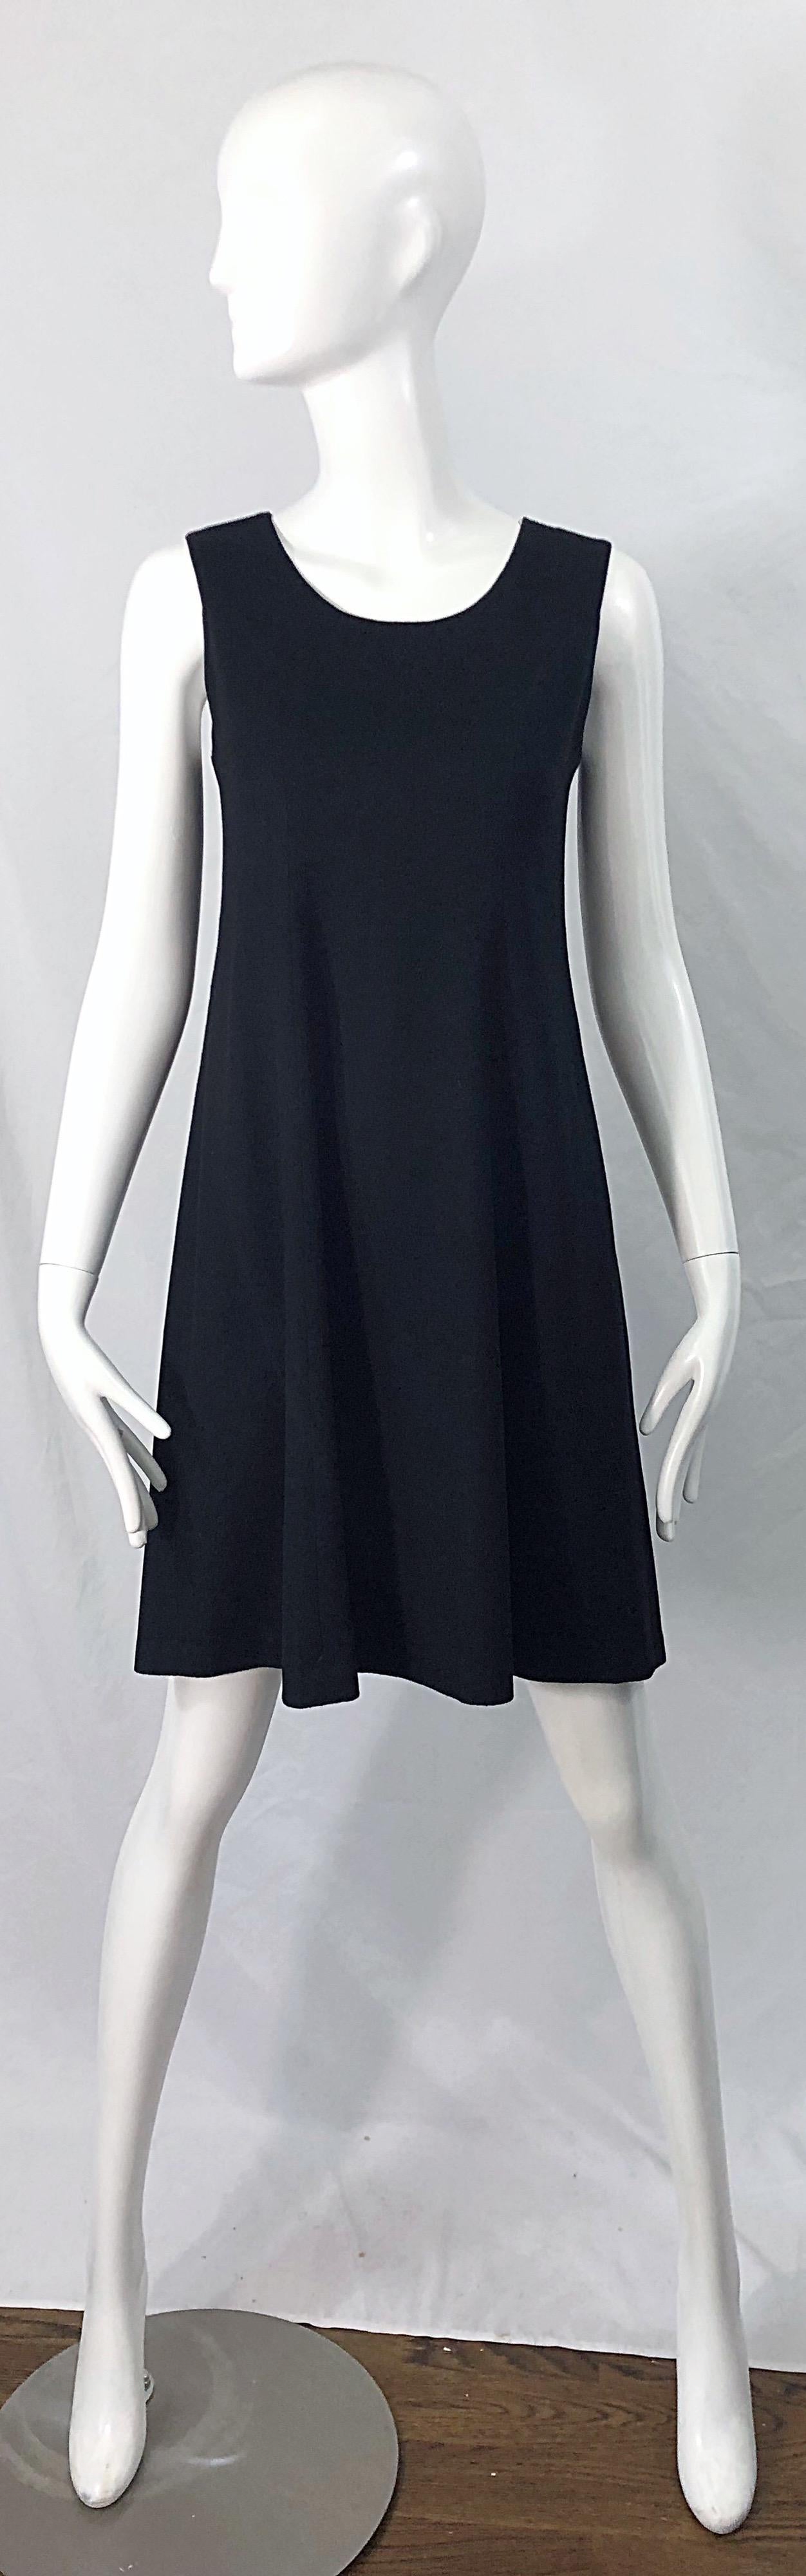 Minimalist chic at its best in this 1990s MORGAN LE FAY by LILIANA CASBAL black wool sleeveless dress ! This dress is a prime example of the 90s Minimalist movement. Flattering shape with a tailored bodice, and forgiving empire style waist / skirt.